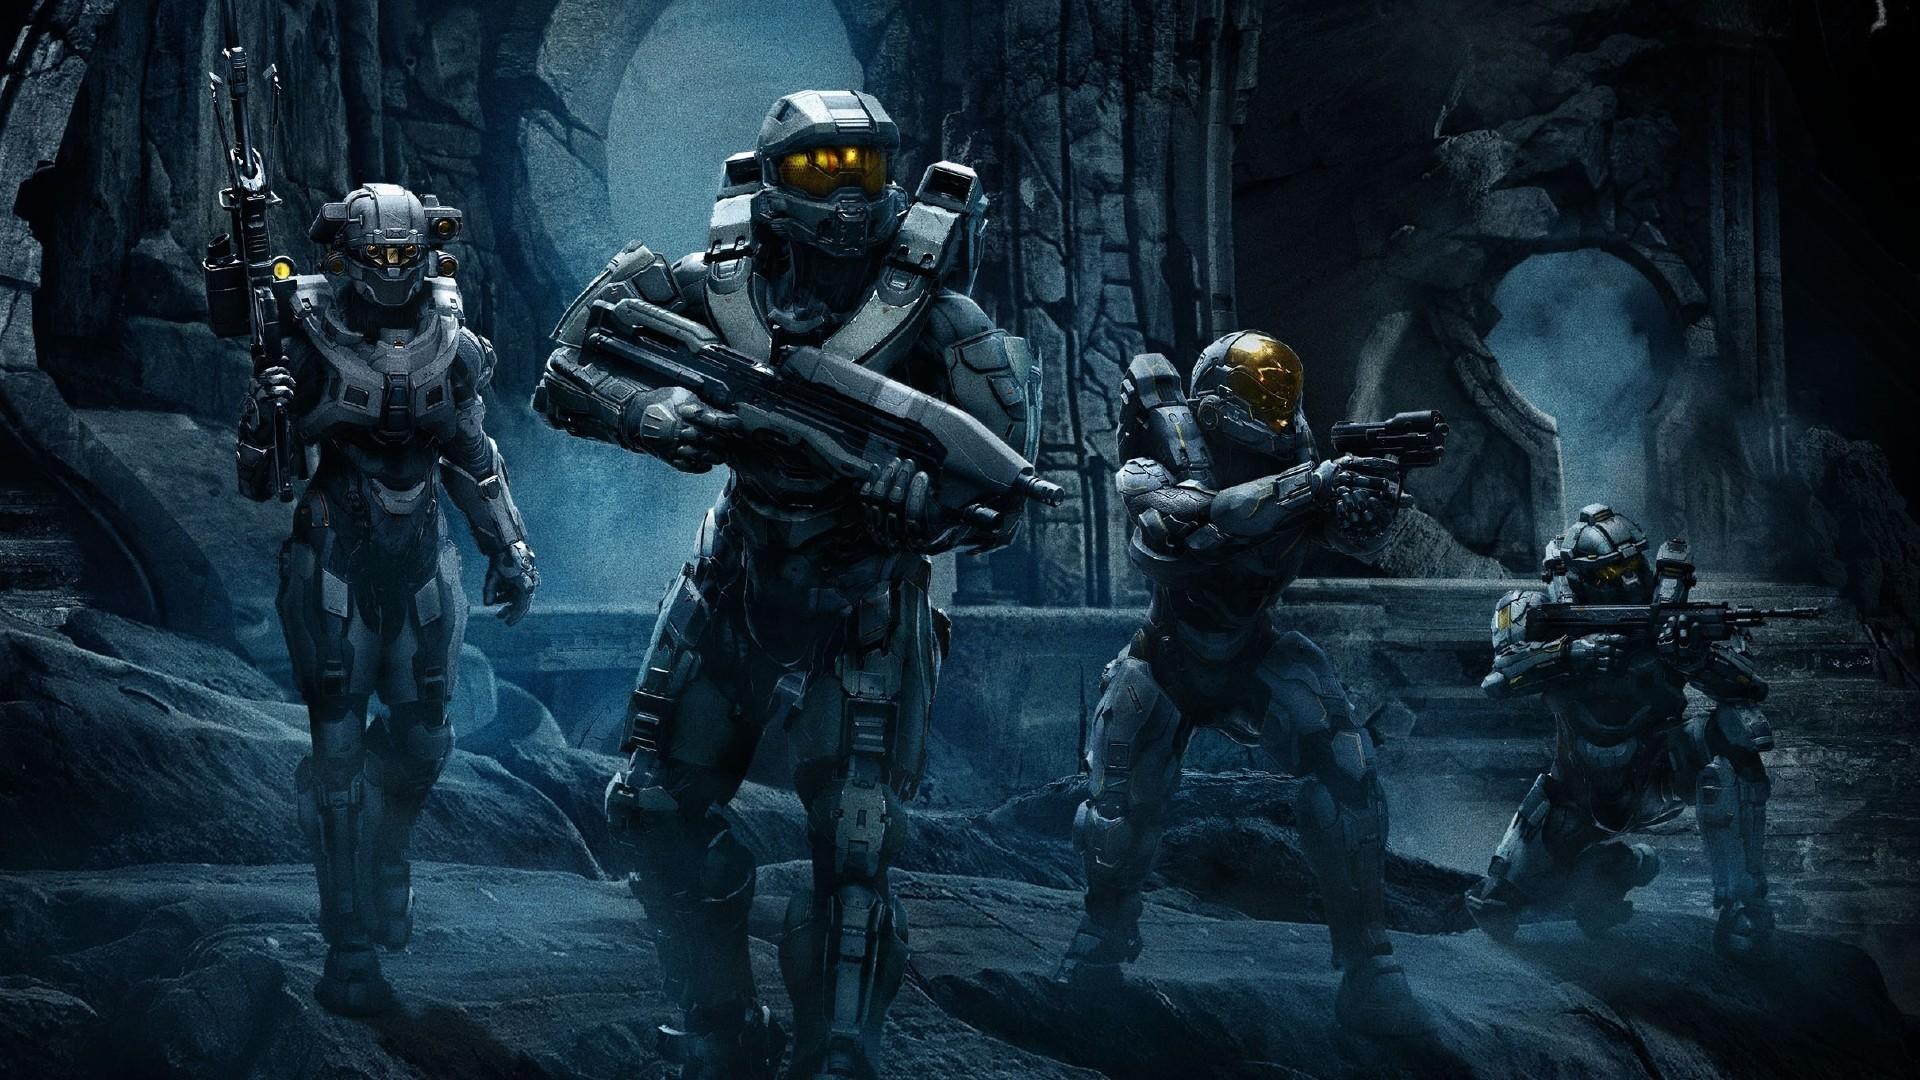 Download 1920x1080 HD Wallpaper halo 5 guardians ghost squad